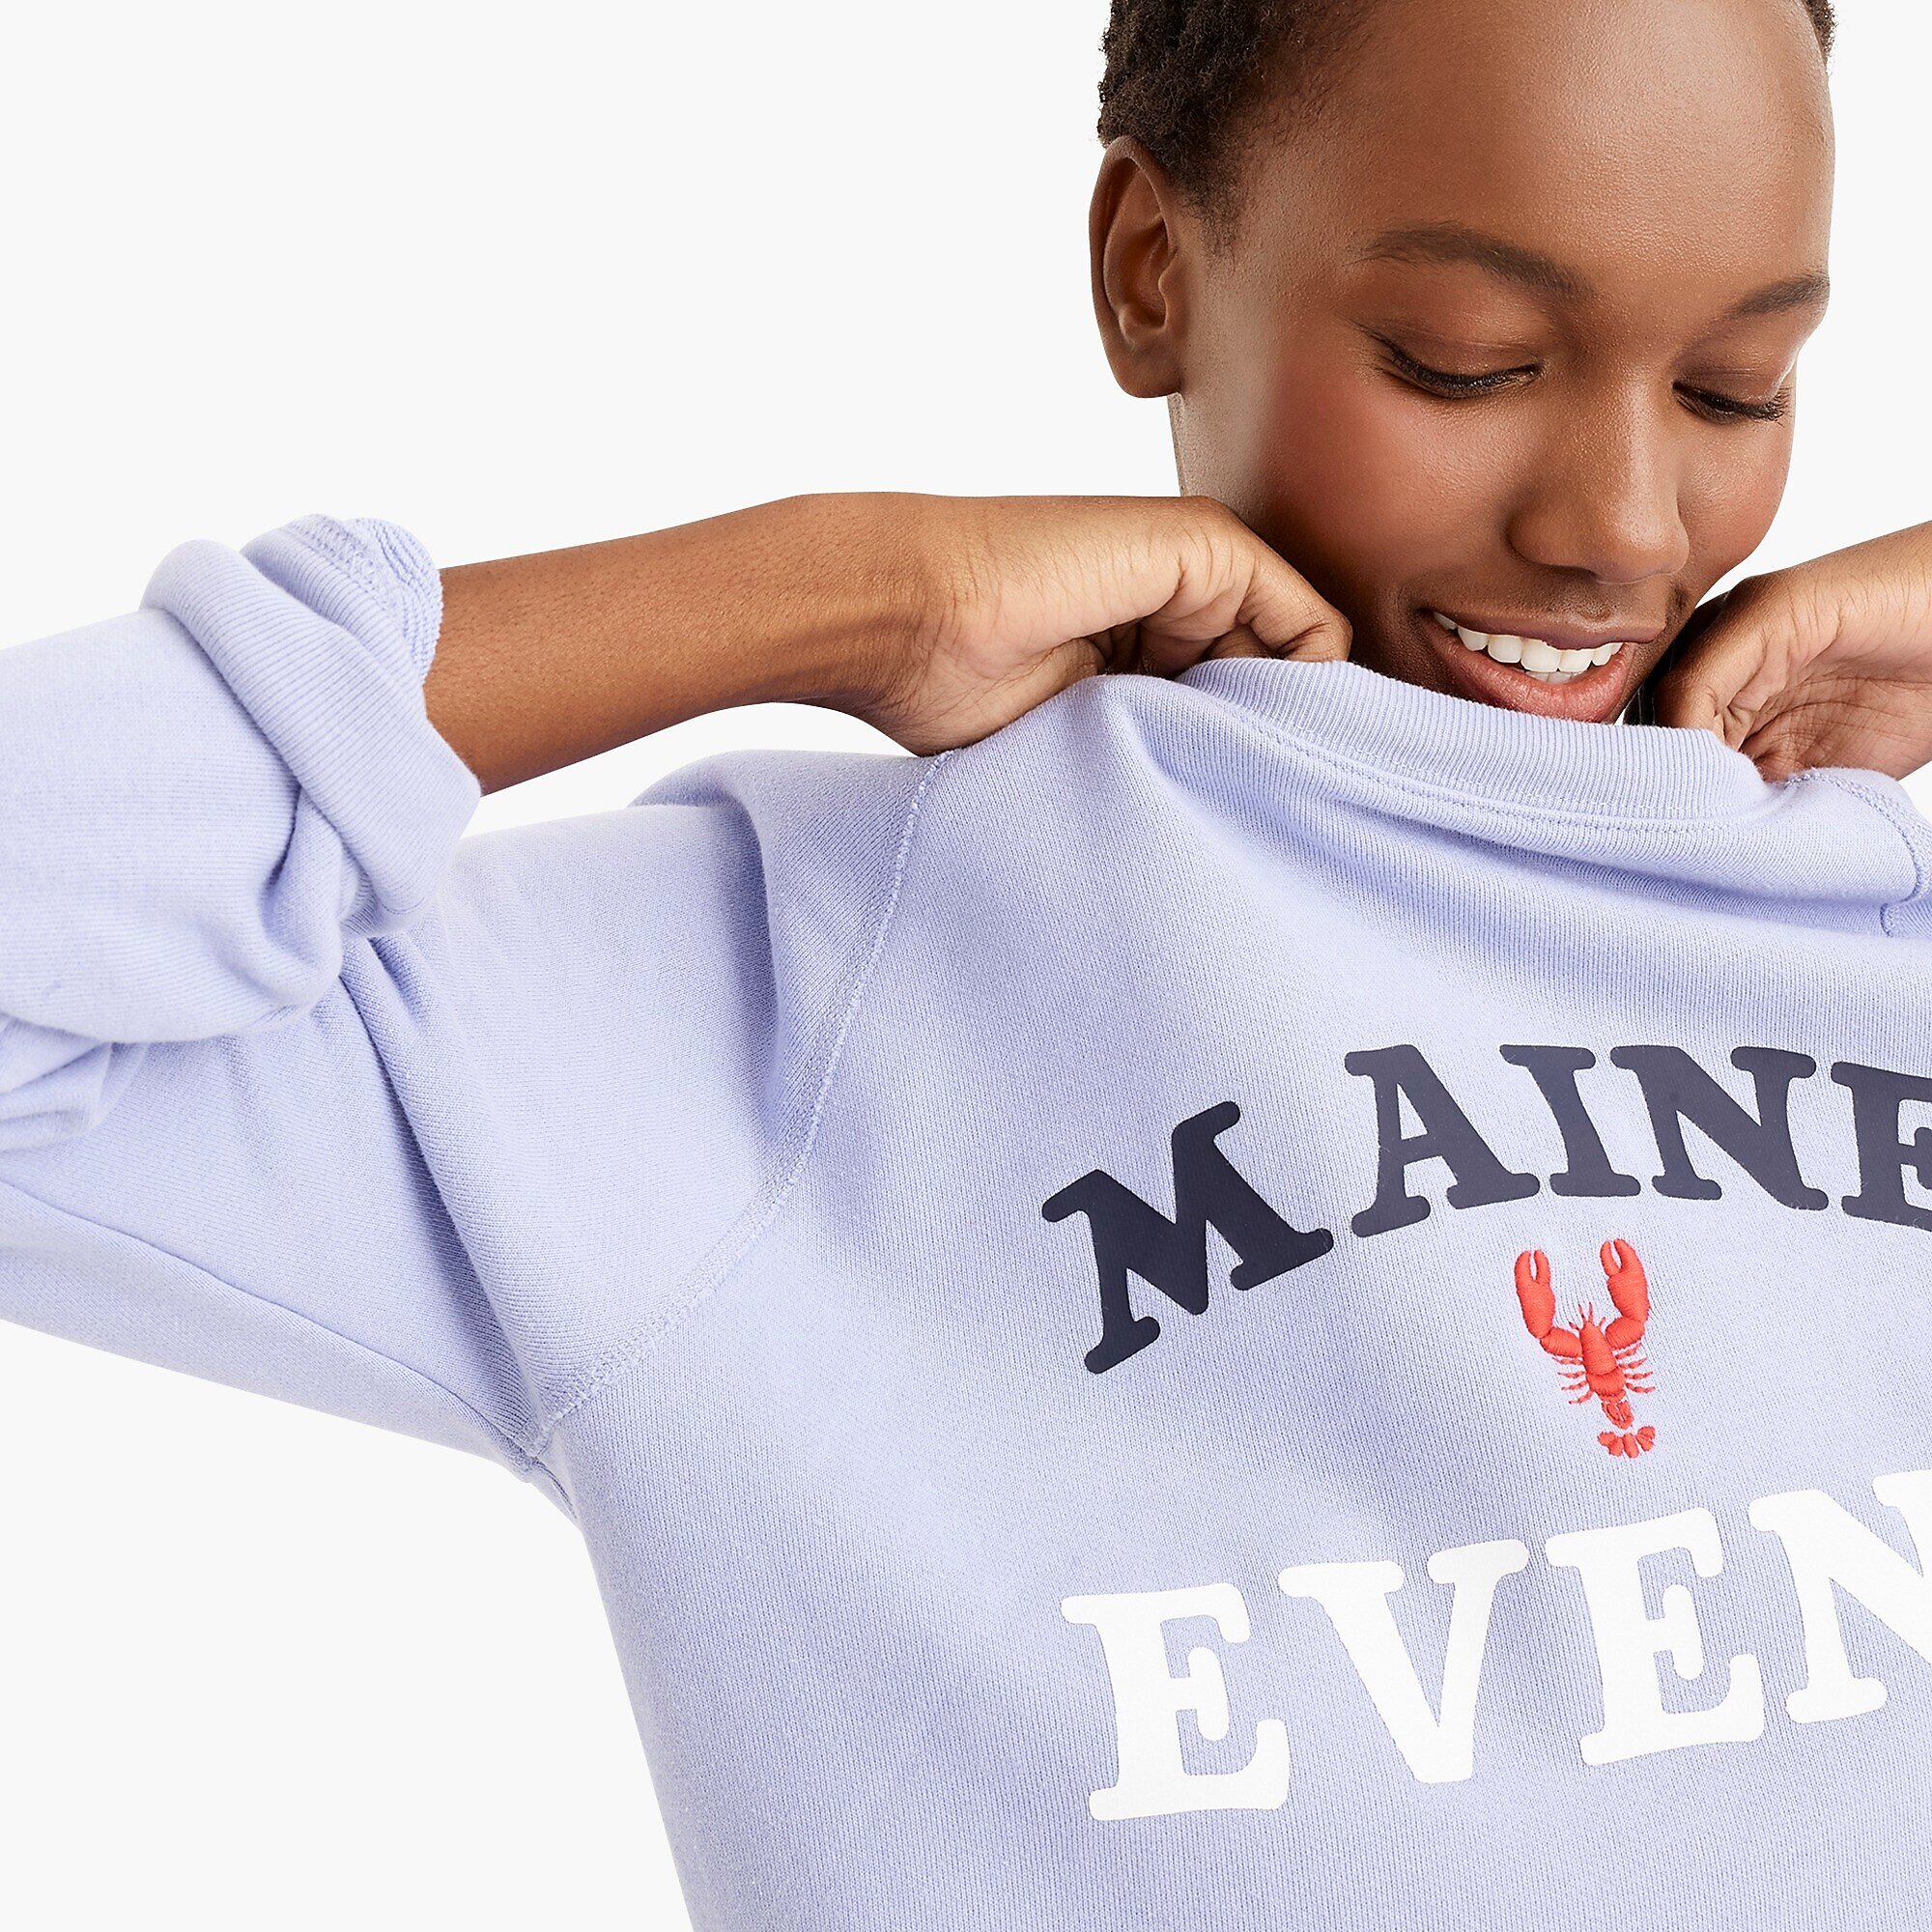 Camilla Atkins graphic design for J. Crew summer 2019-Maine Event embroidery.jpeg